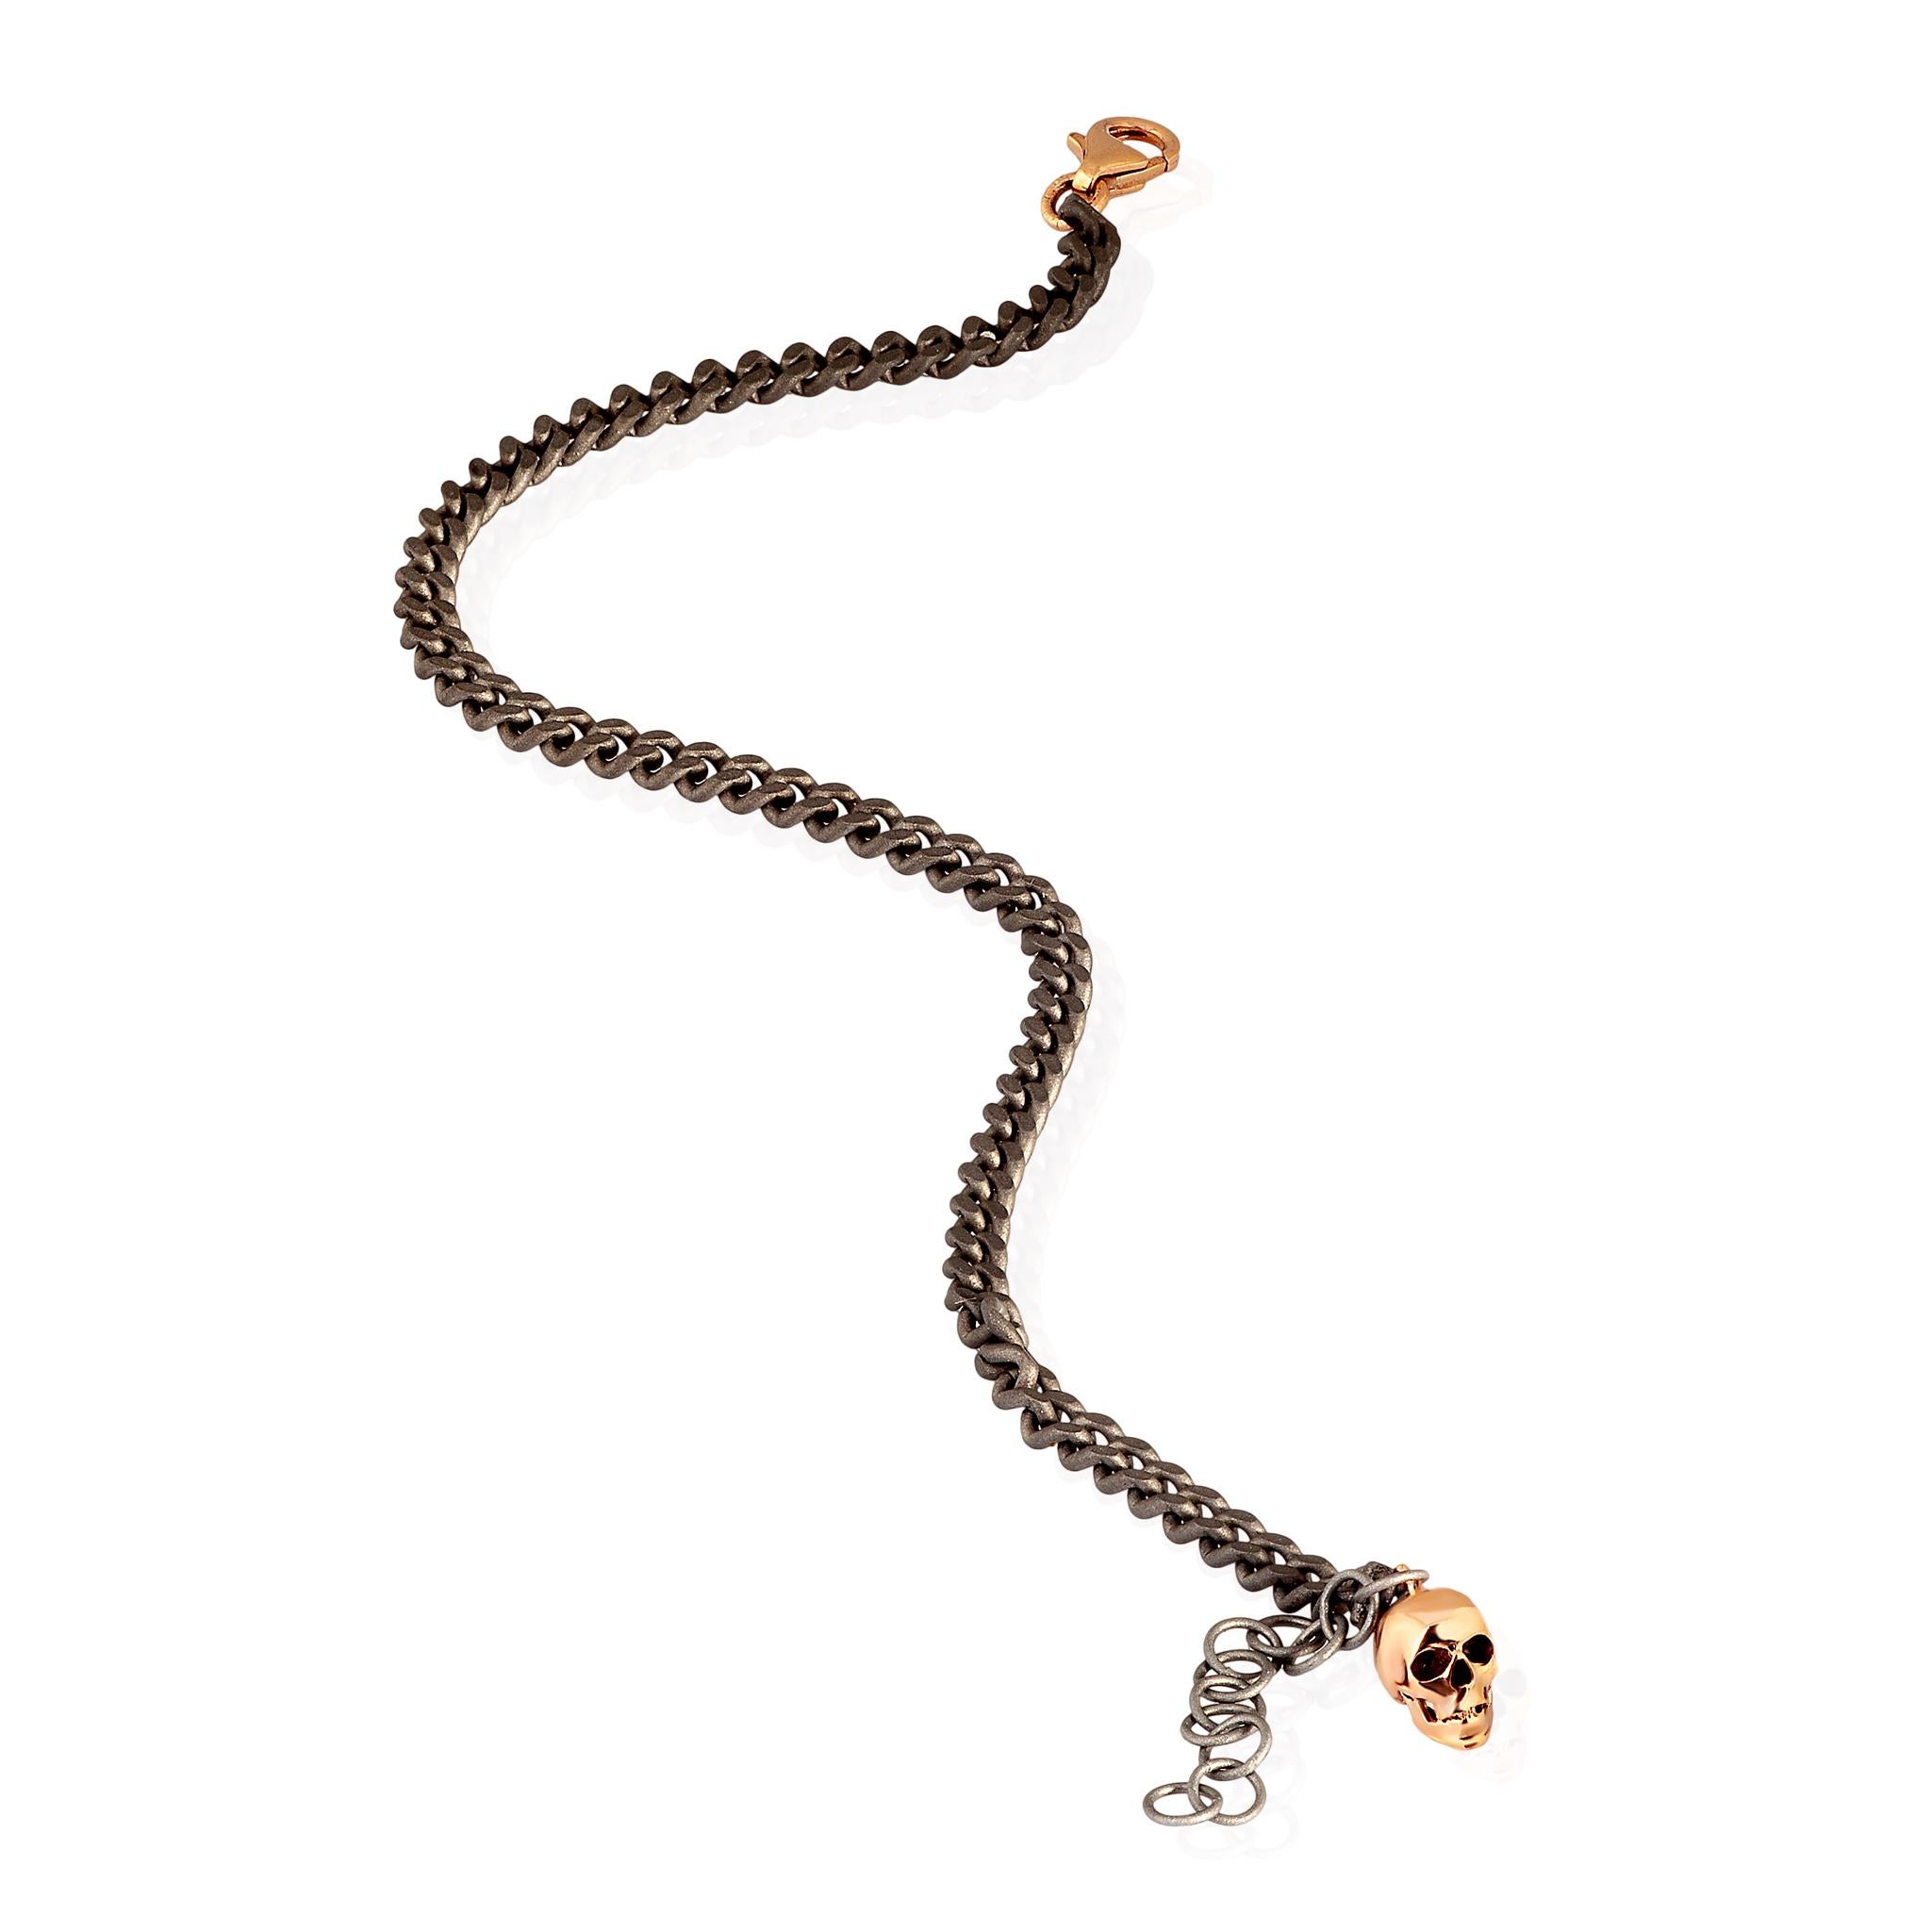 Men's titanium bracelet, 9 kt rose gold clasp and 9 kt red gold skull. The fine groumette chain is the main element of the bracelet, which ends with a precious 9kt rose gold hook clasp and a charming red gold skull pendant on the 9kt rose gold ring.